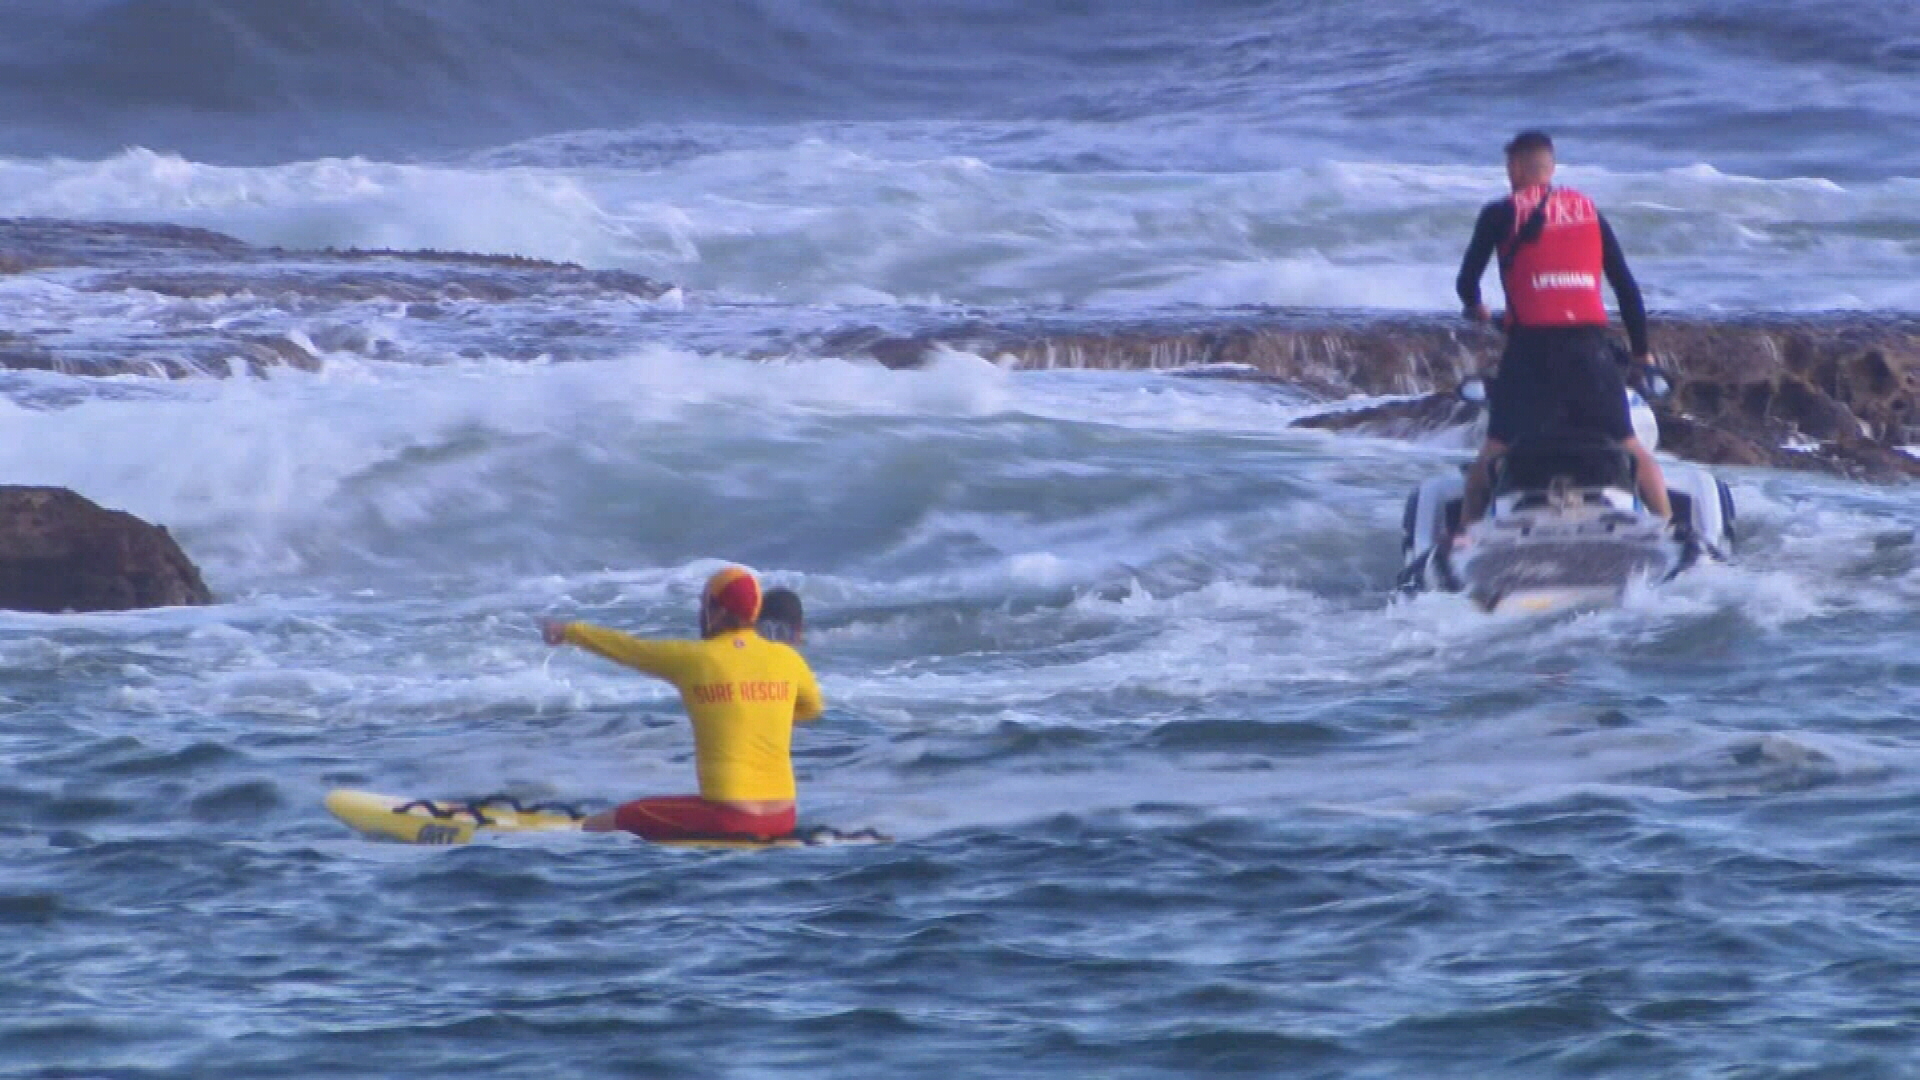 Surf life savers swarmed the waters searching for the man.